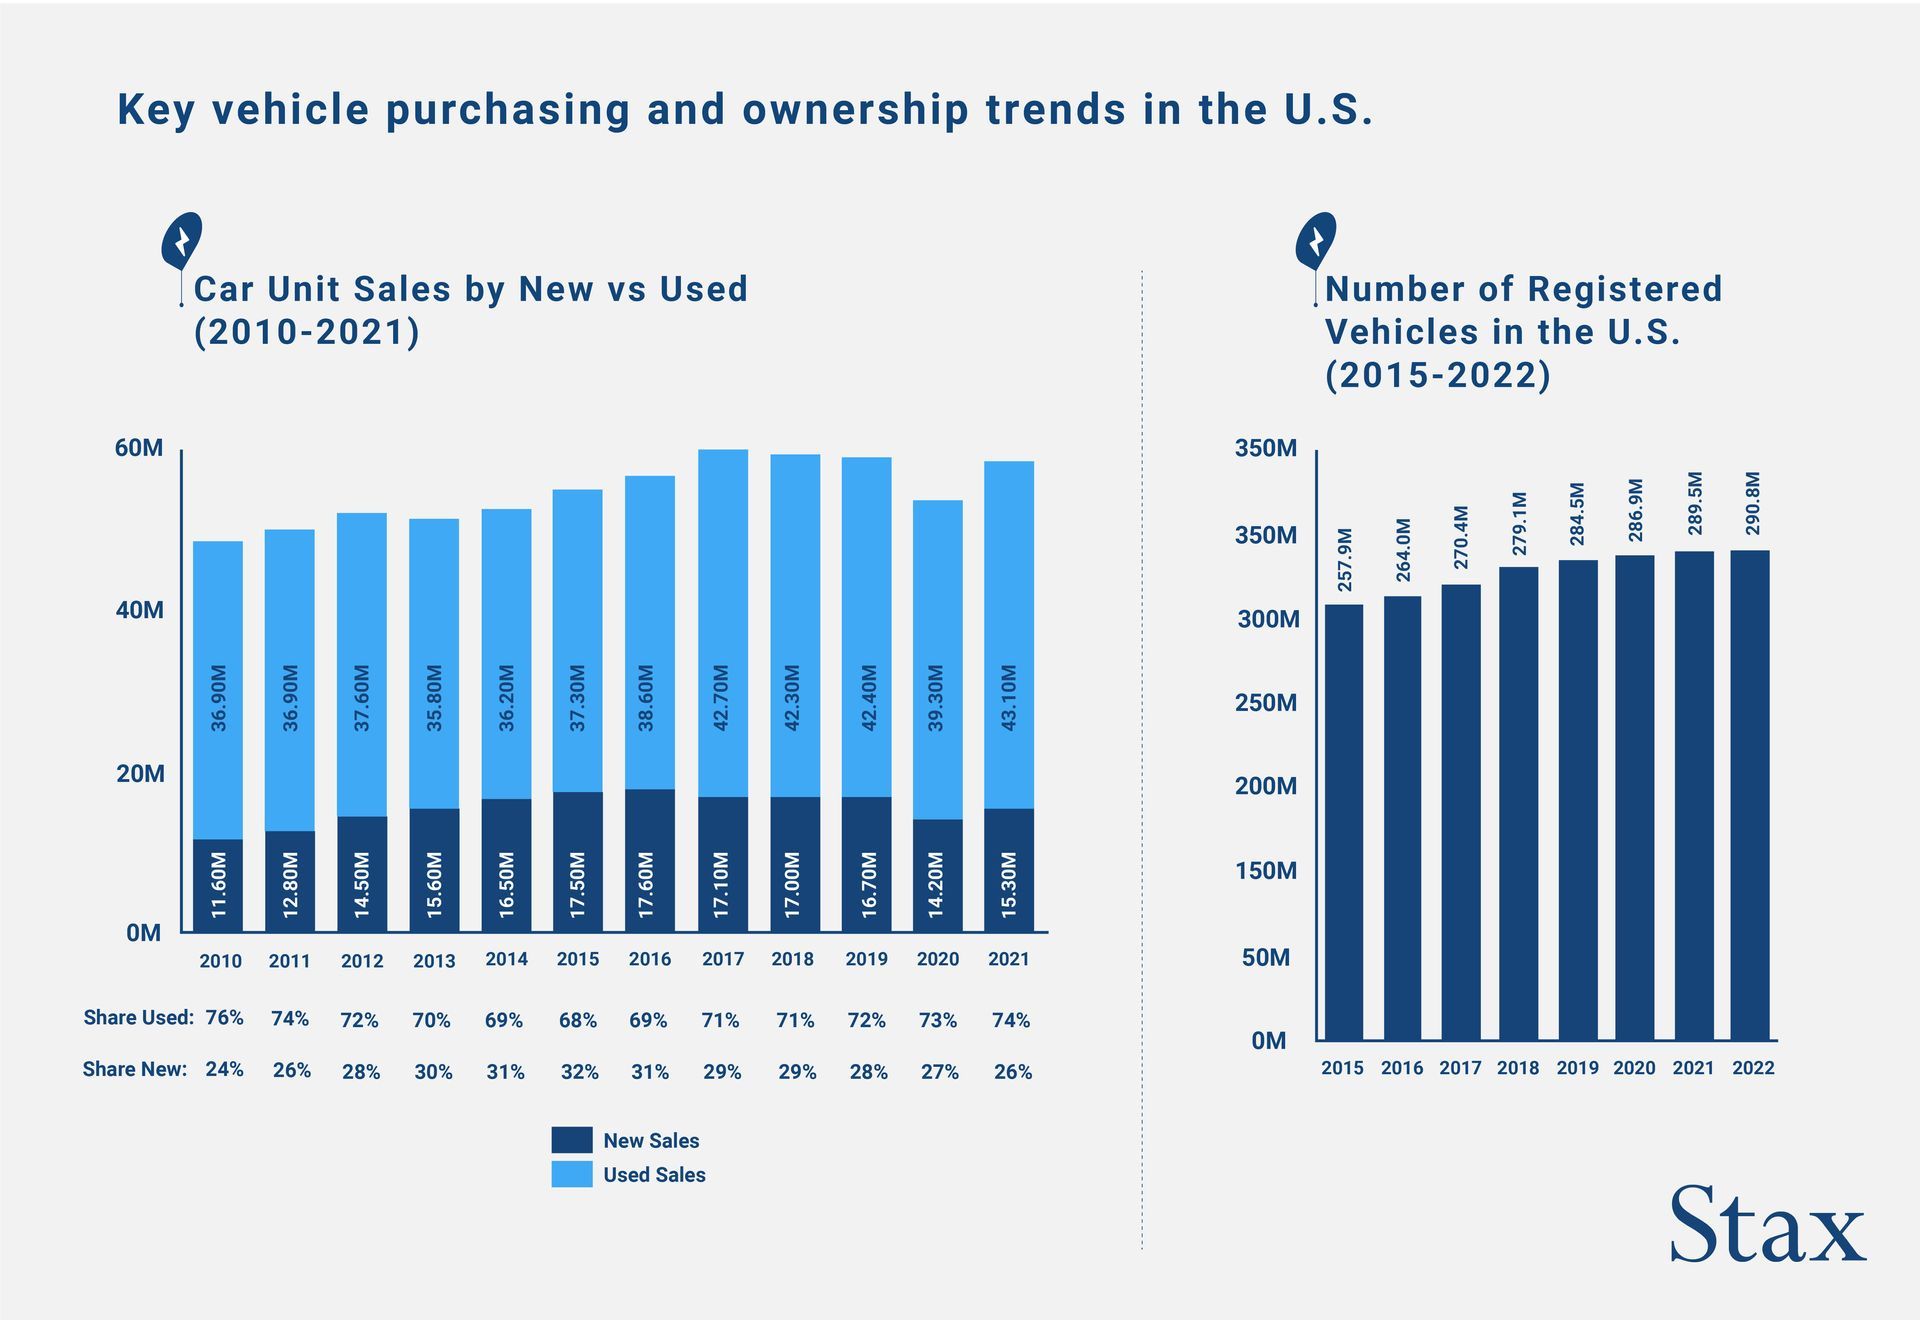 An infographic of the key vehicle purchasing and ownership trends in the U.S., displaying bar charts of car unit sales by new vs used in the U.S. from 2010 to 2021 and the number of registered vehicles in the U.S. from 2015 to 2022.